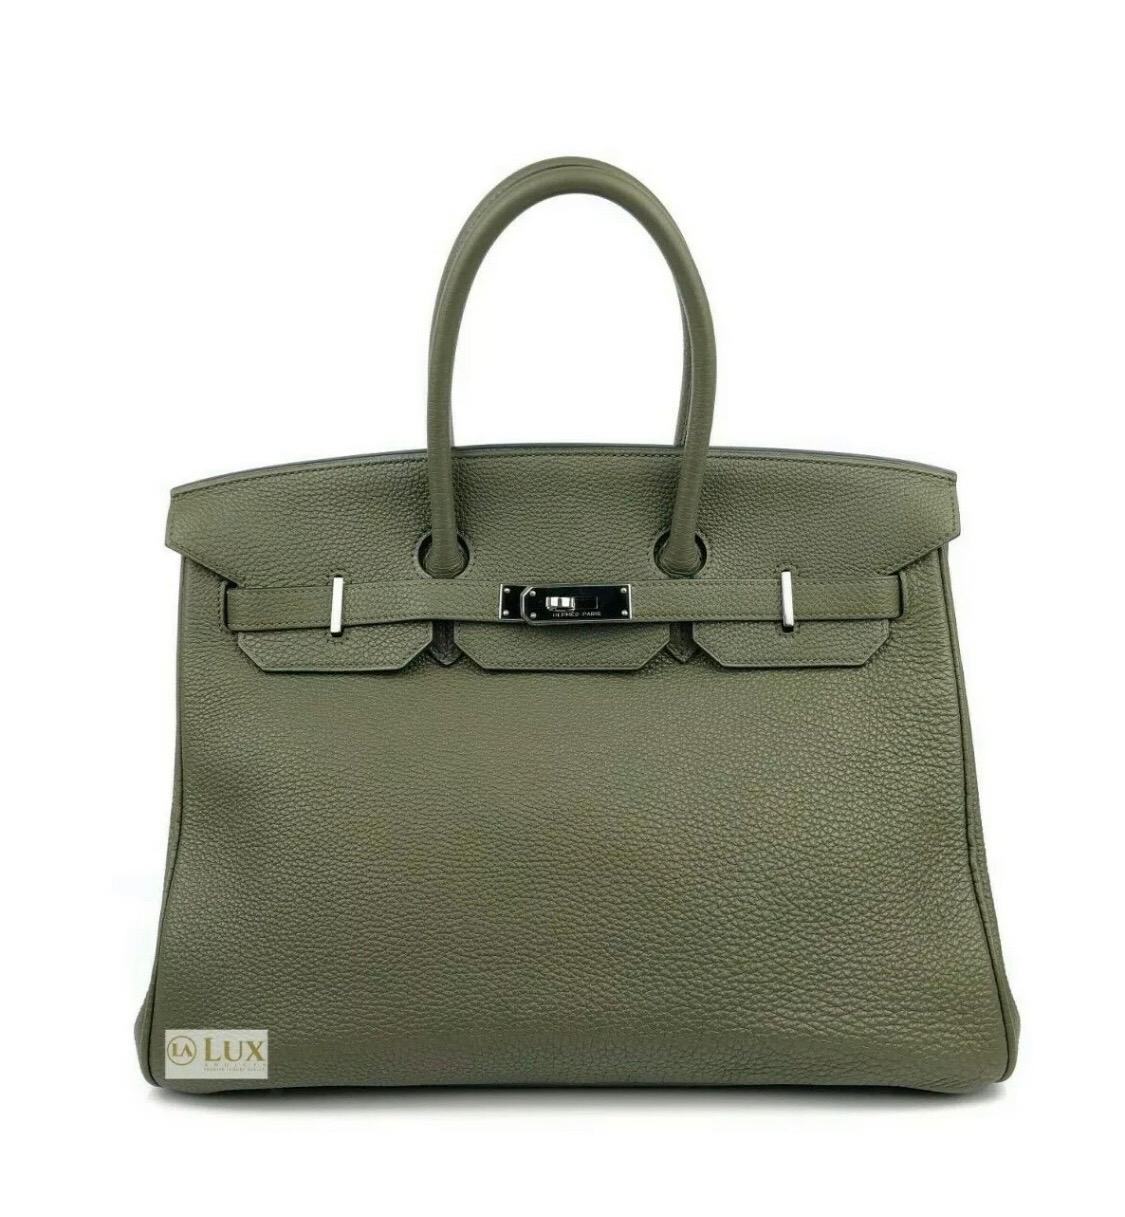 HERMES BIRKIN 35 CANOPEE ARMY GREEN PALLADIUM HWD

EXCELLENT CONDITION. Light scratching on hardware, excellent corners.

Shop with confidence from Lux Addicts. Authenticity guaranteed! 